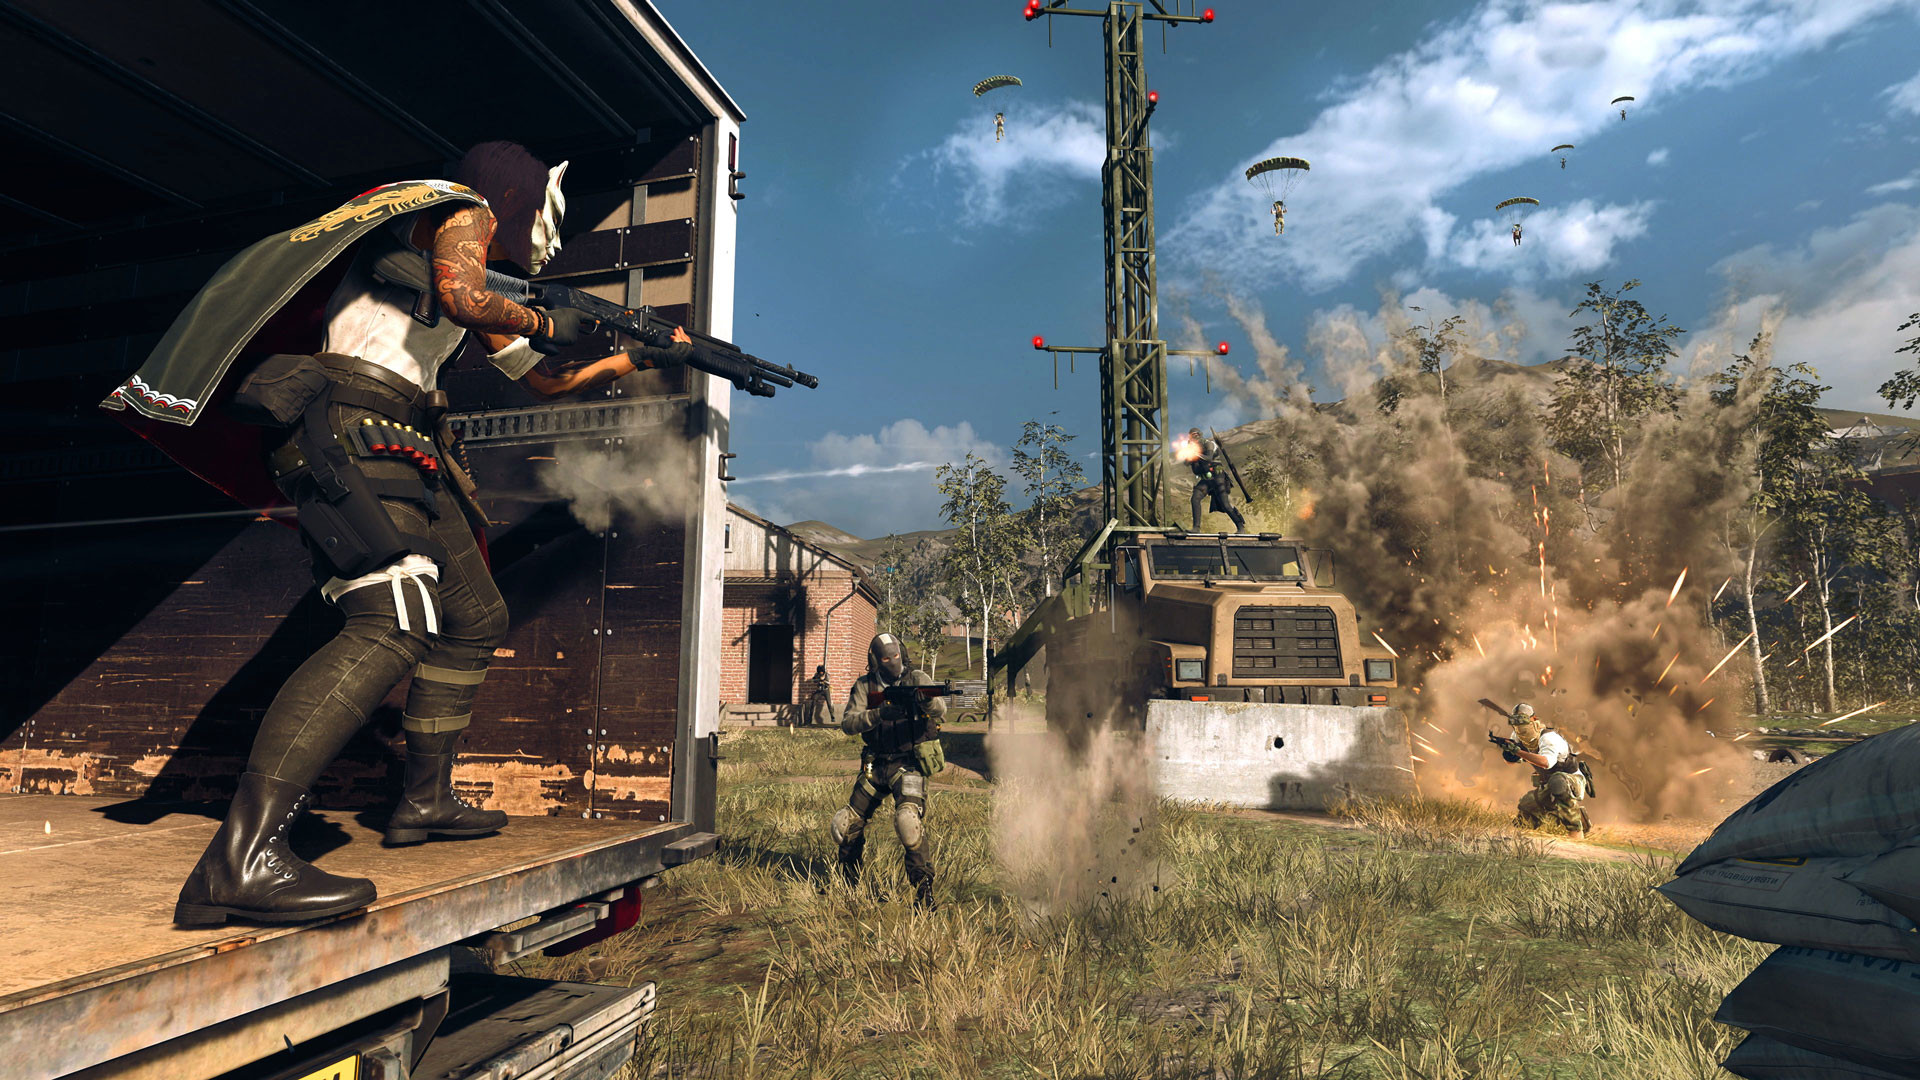 Warzone broadcast stations: A soldier wearing a mask and cloak firing at enemies in the distance from the back of a truck.